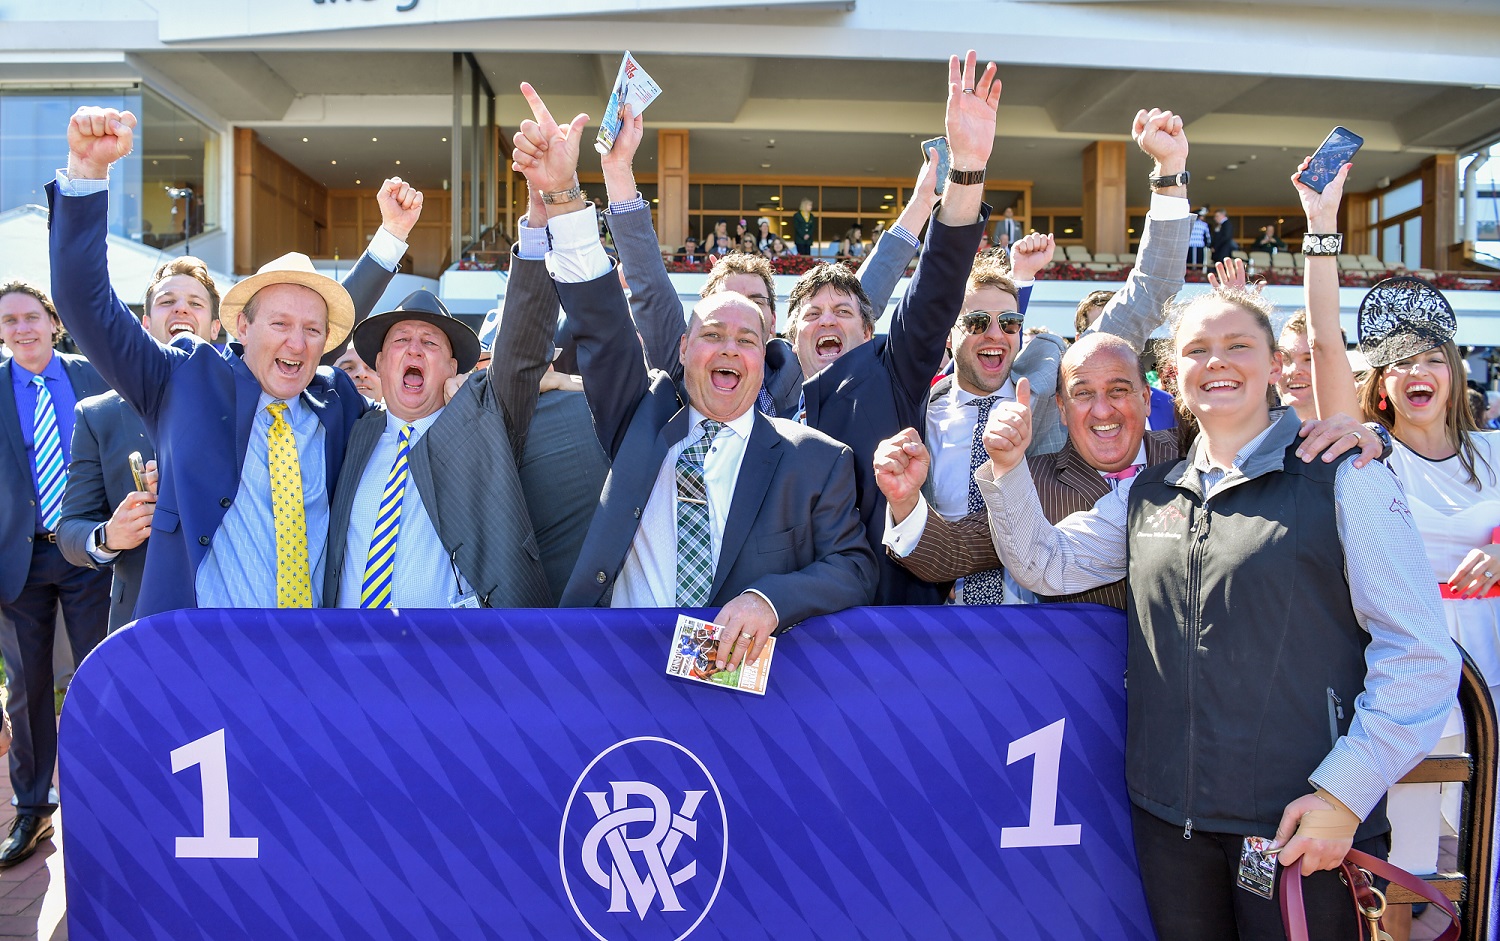 Connections of Extra Brut Celebrate Listed Win